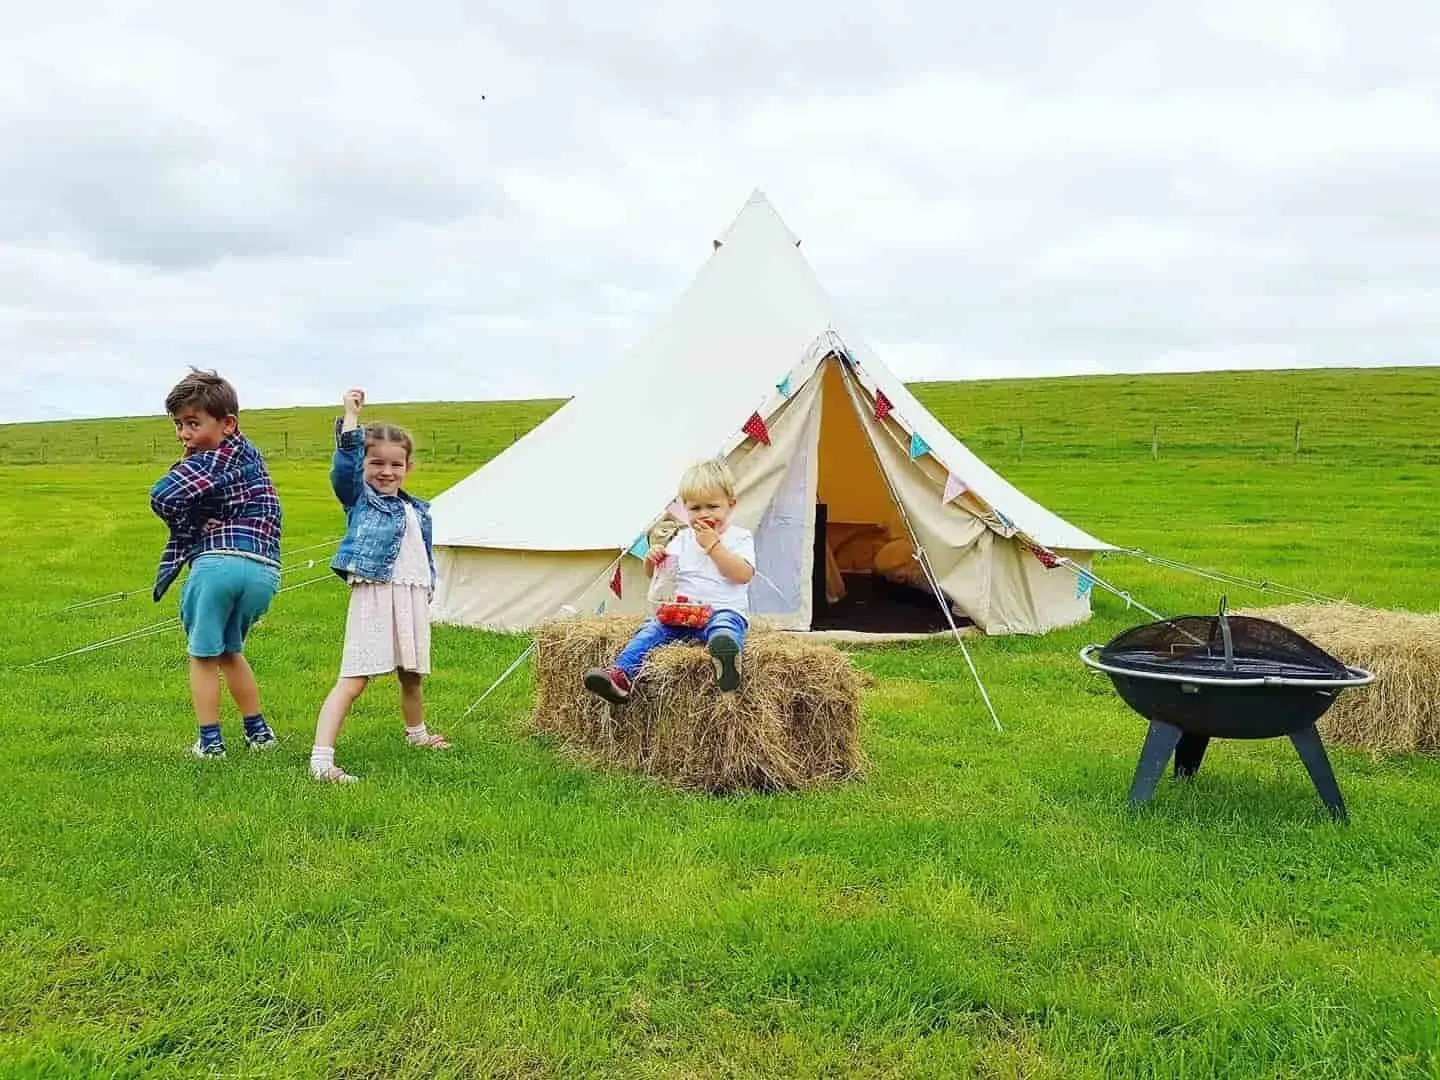 Kids enjoying their teepee during staycation at Dewflock Farm campsite, Dorset.